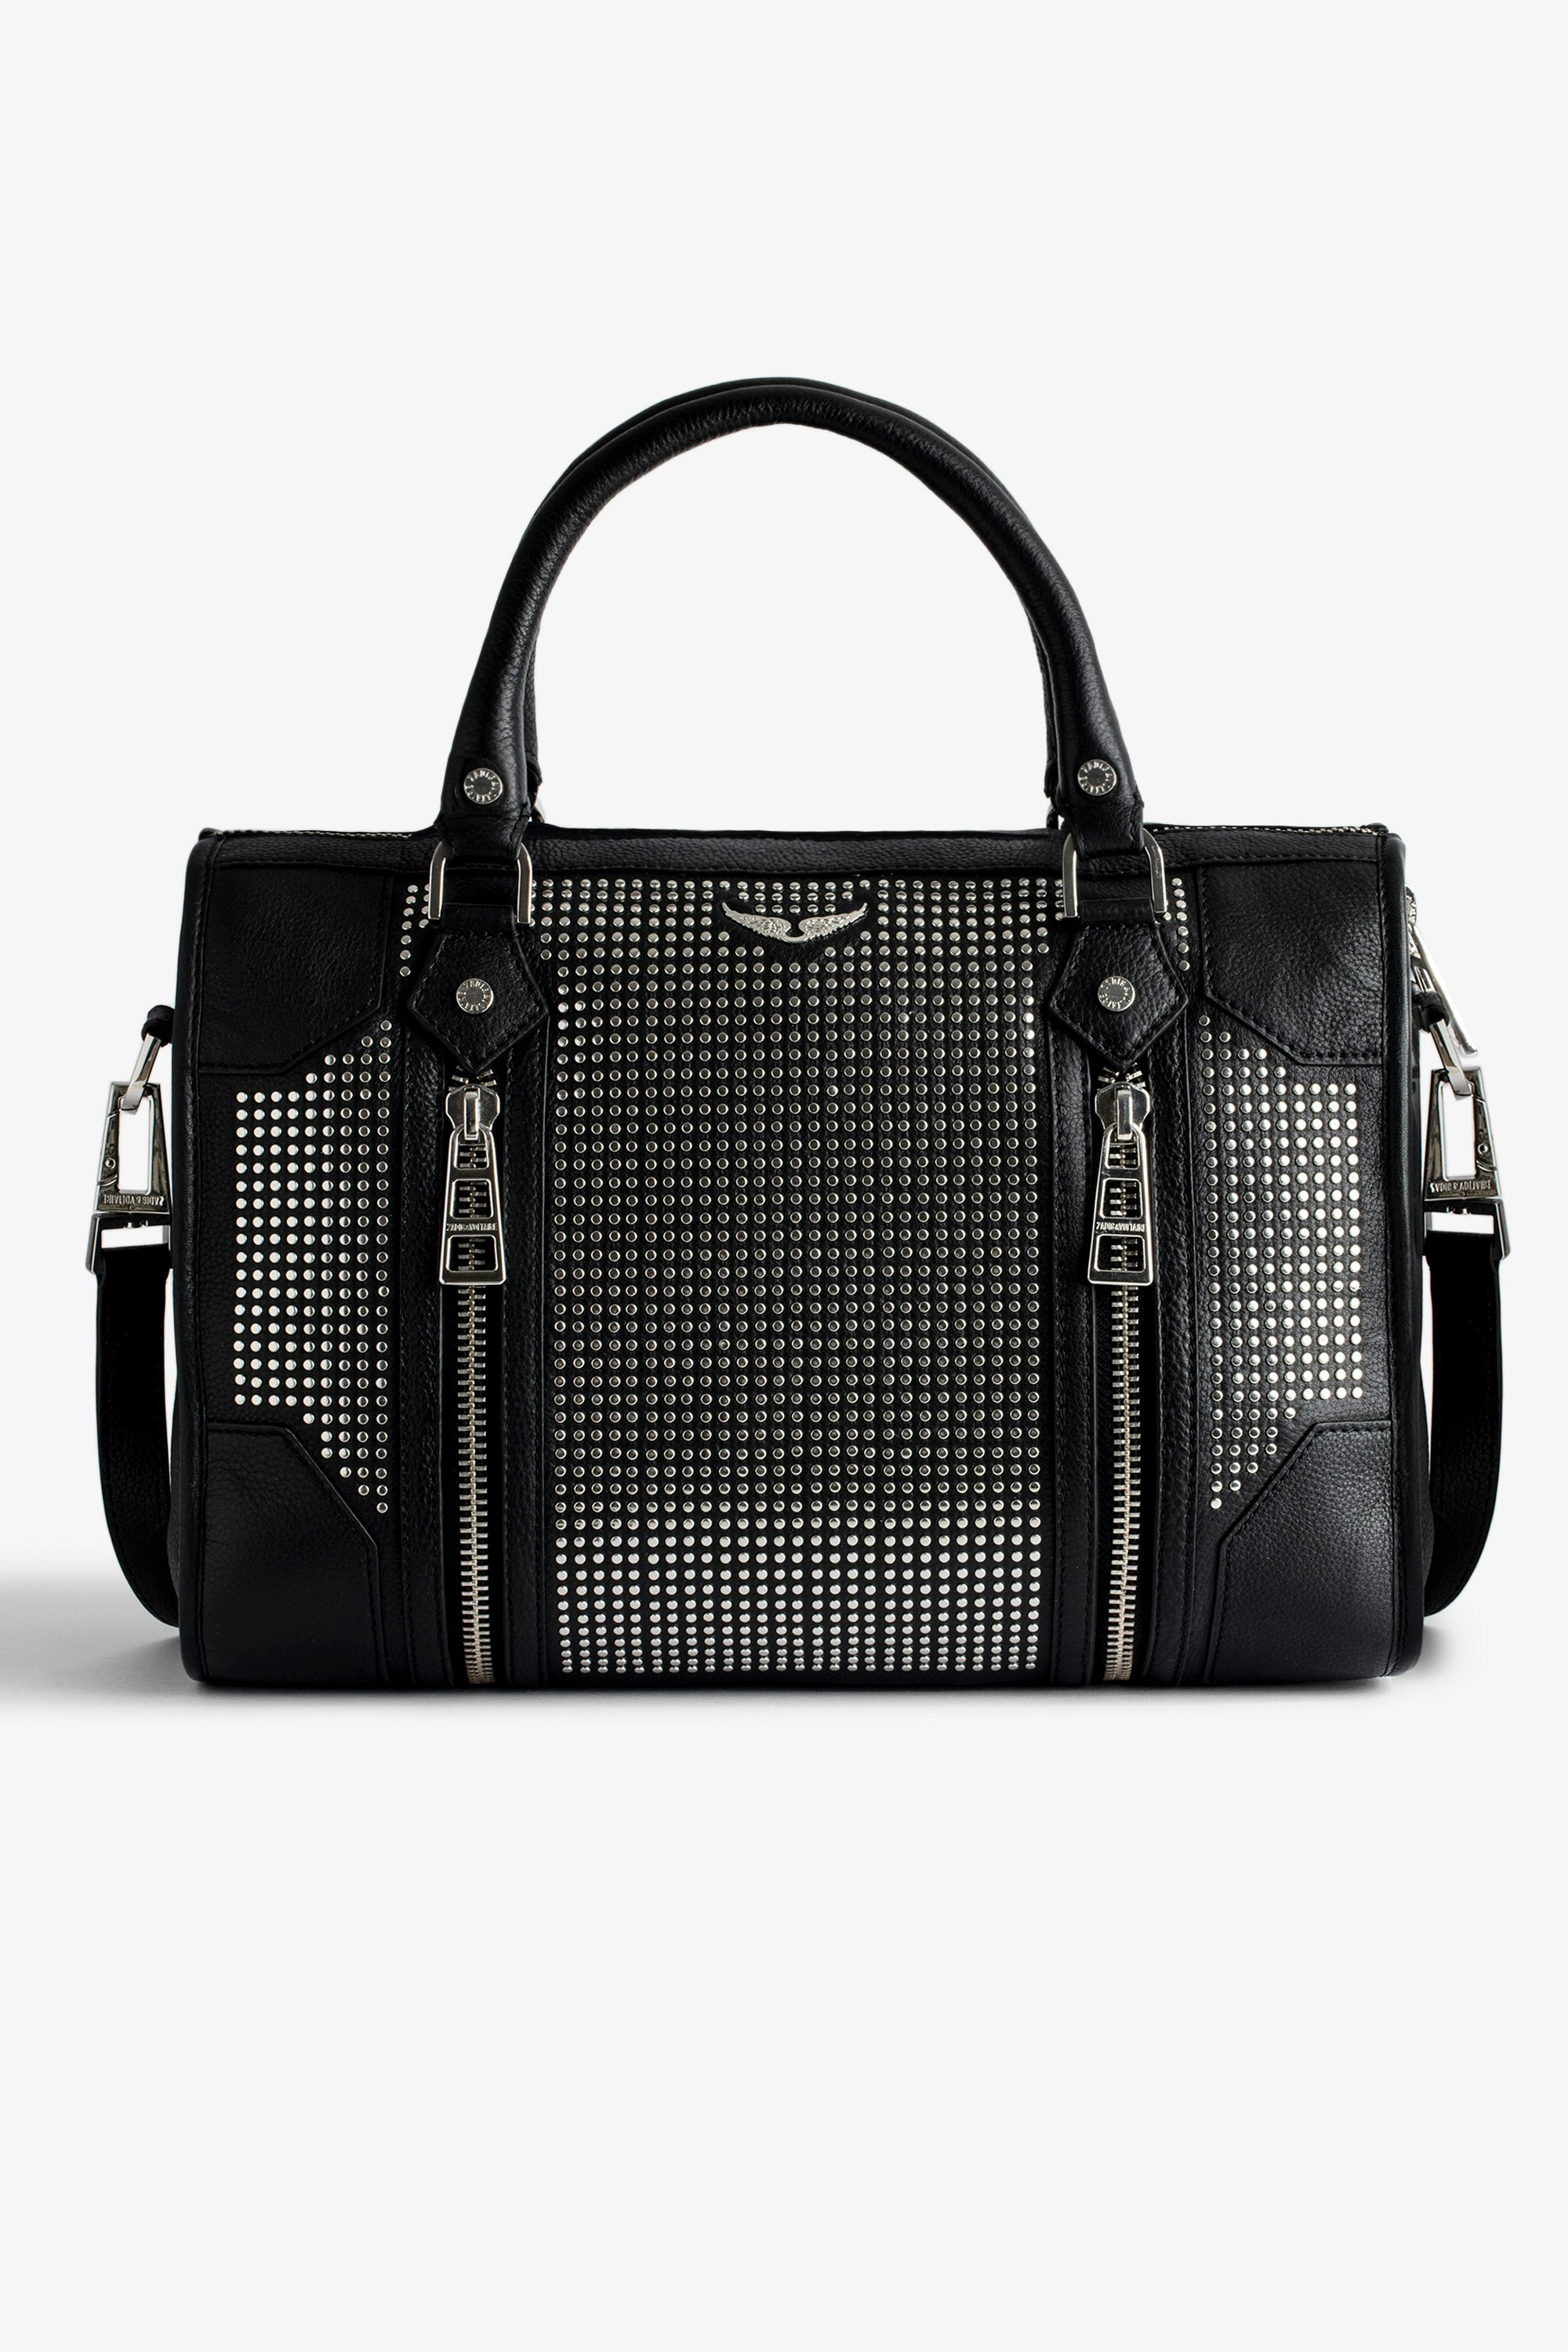 Sunny Medium #2 Bag - Women’s black leather medium zipped bag with studs and a shoulder strap.